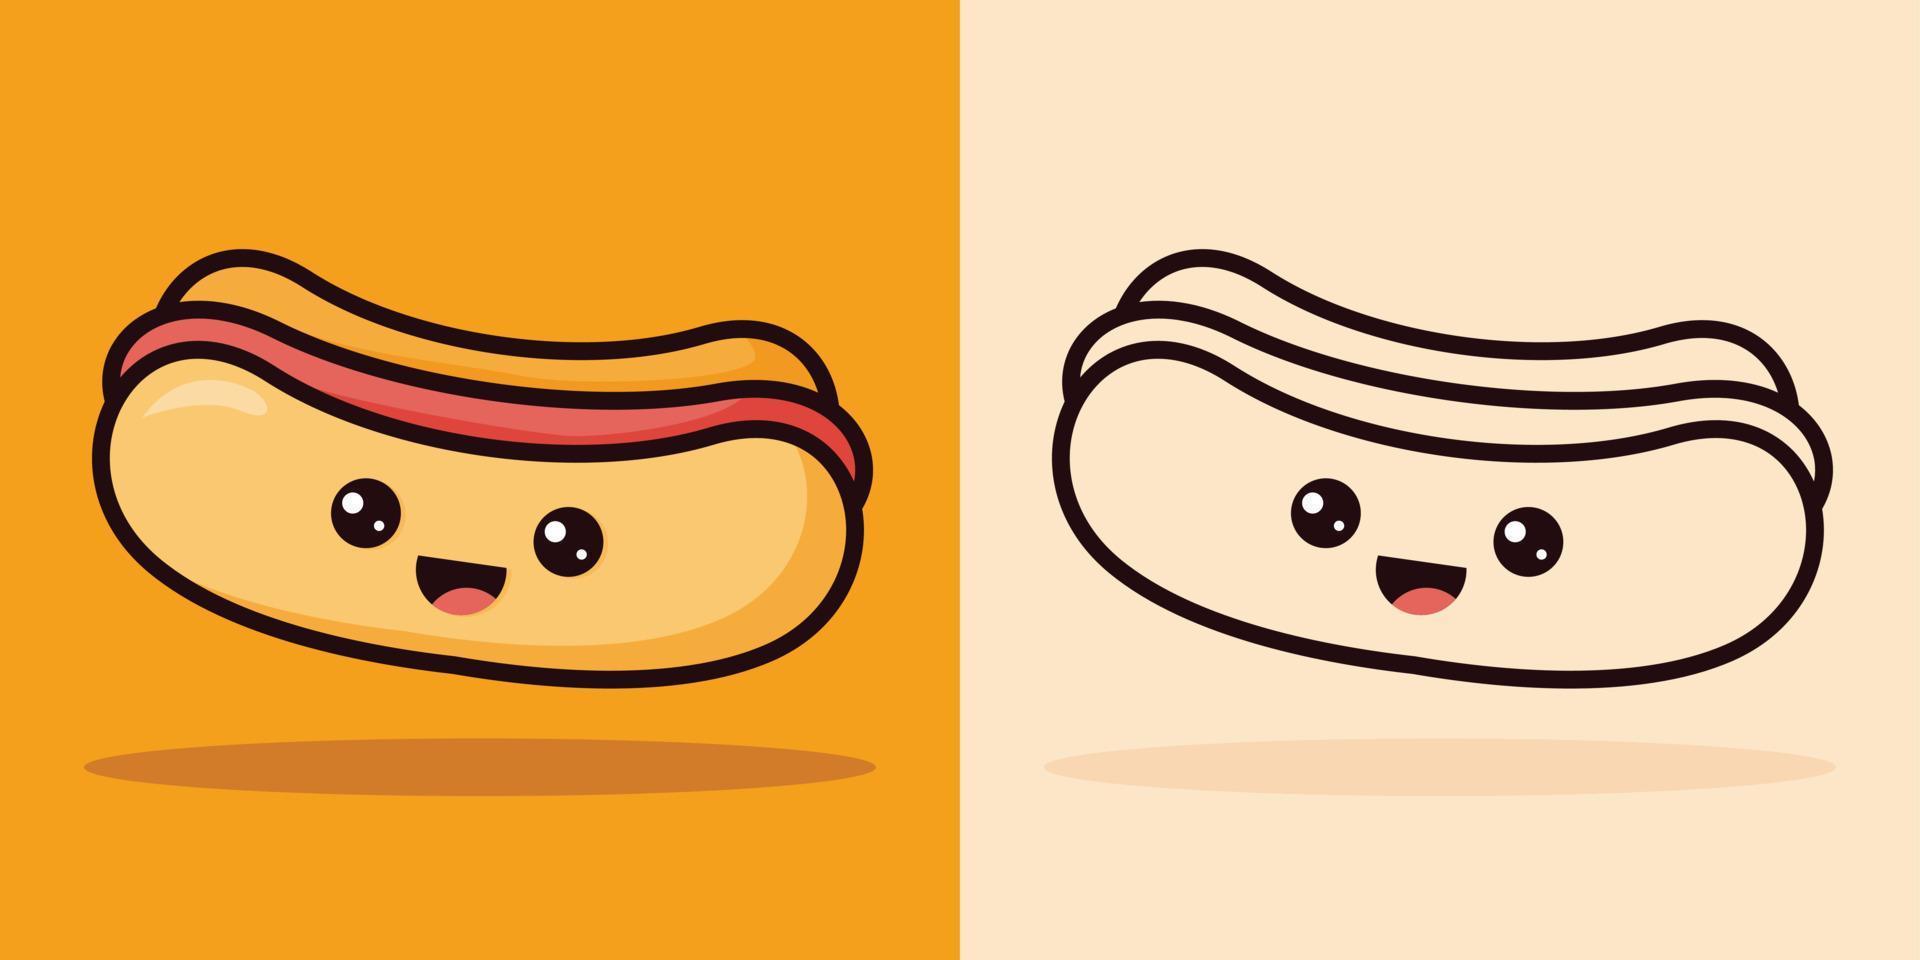 Kawai hotdog graphic vector illustration. Suitable for food products, etc.